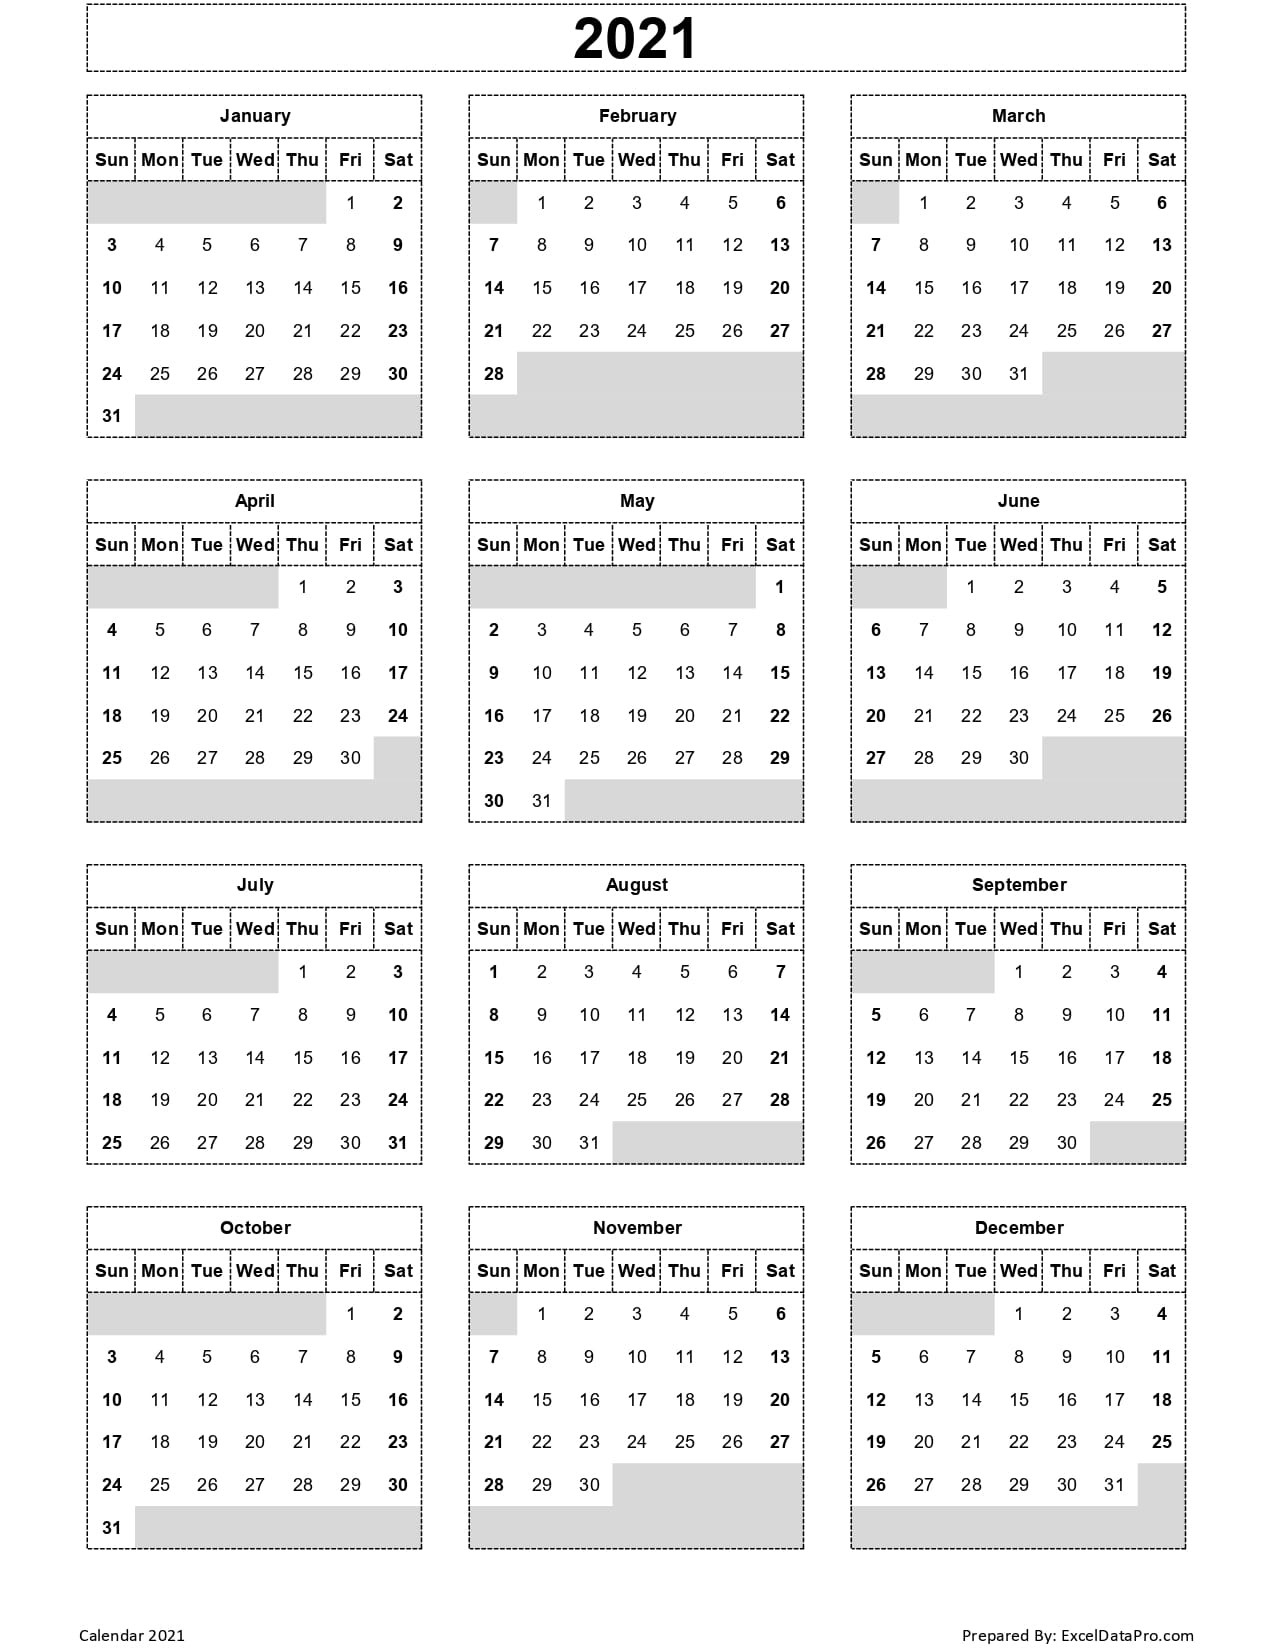 Download 2021 Yearly Calendar (Sun Start) Excel Template-Printable 2021 Monthly Calendar 2 Pages